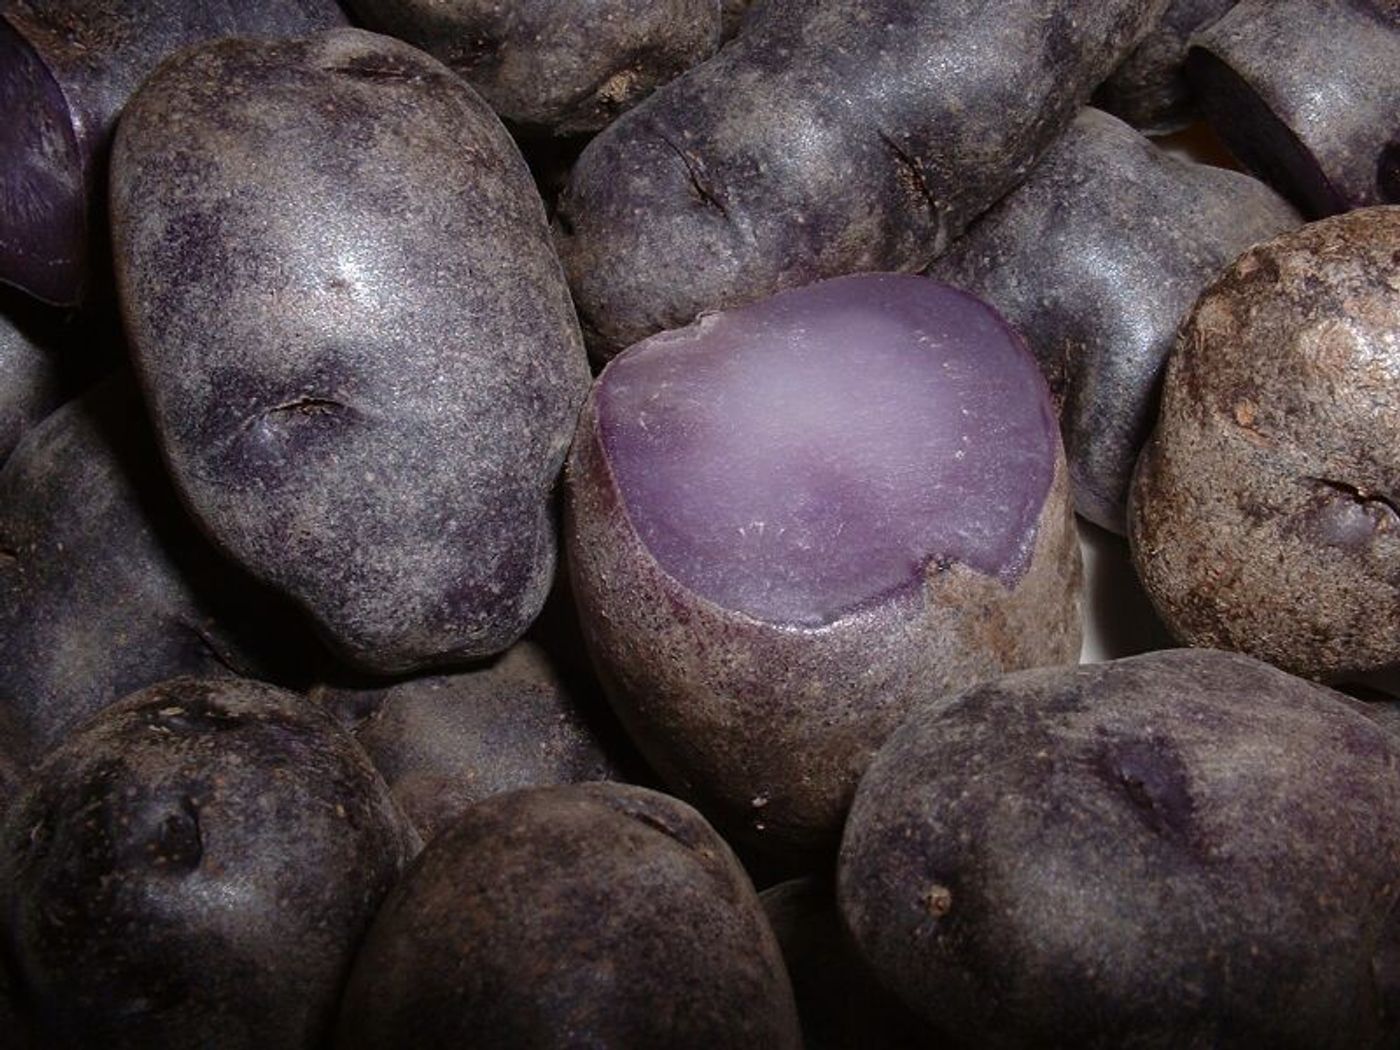 Purple potatoes may have preventive powers.